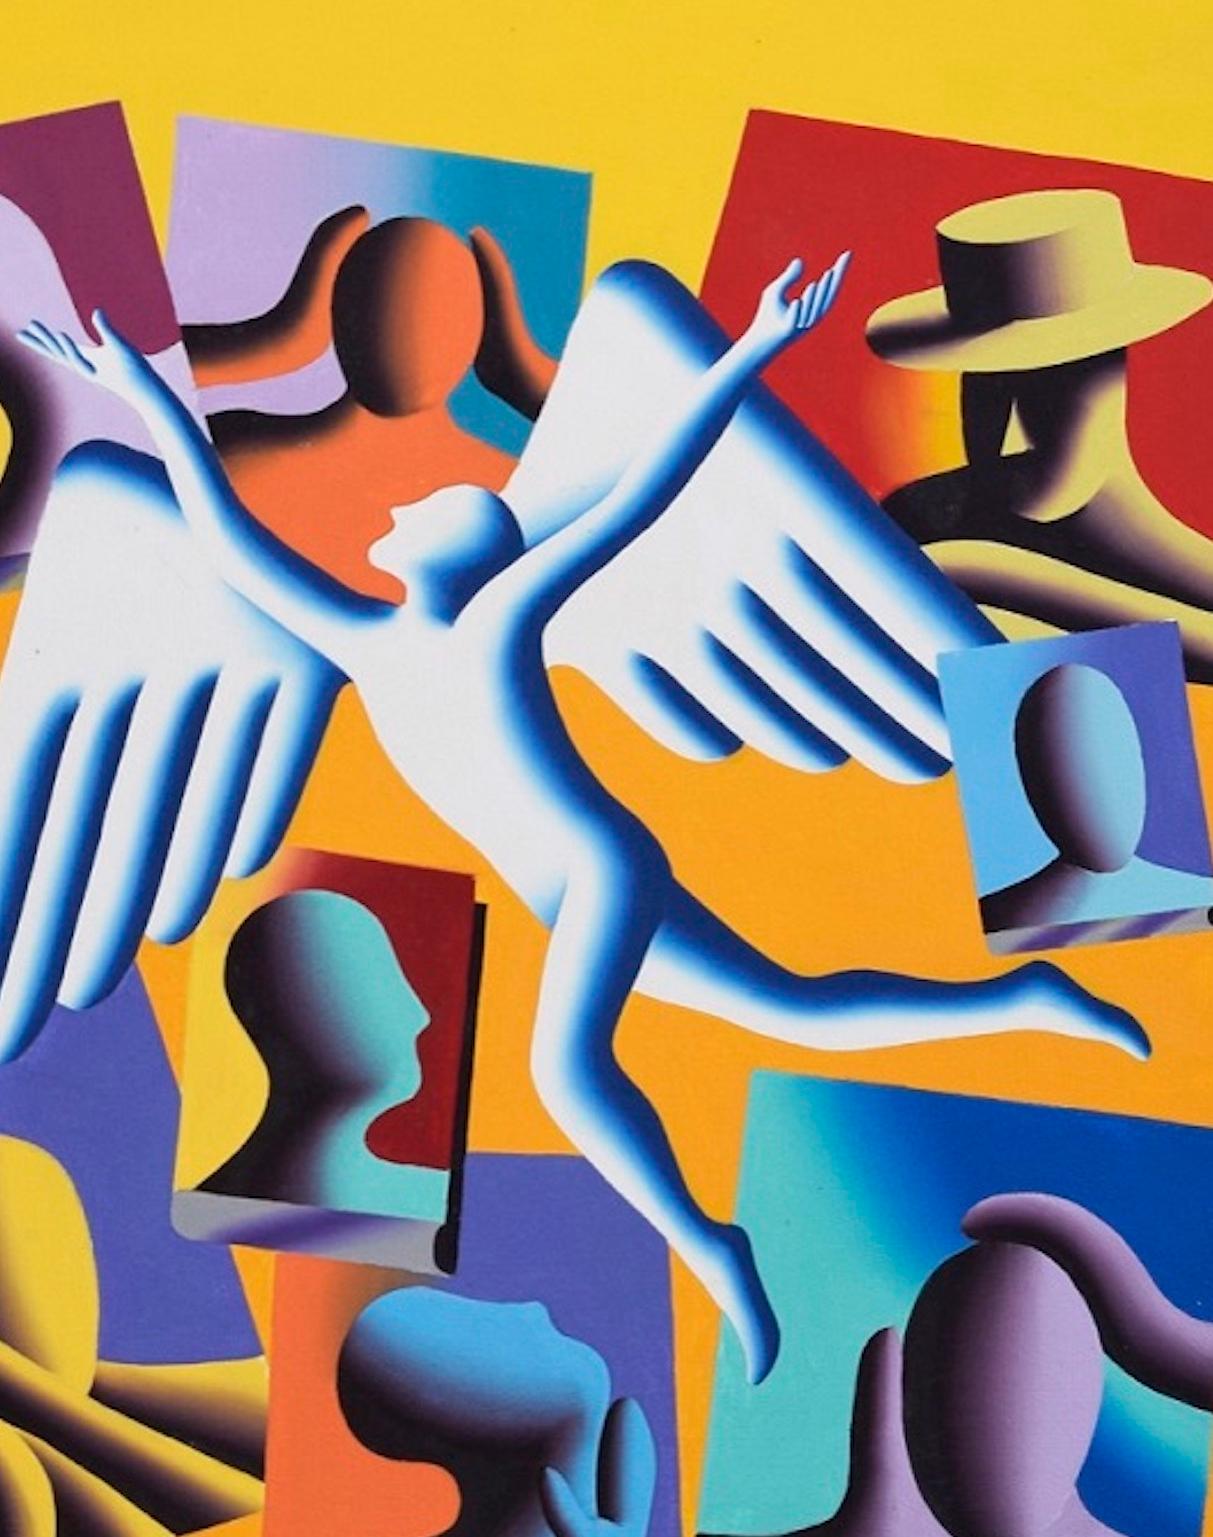 Leaming Annex - Original Oil on Canvas by M. Kostabi - 1995 - Contemporary Painting by Mark Kostabi